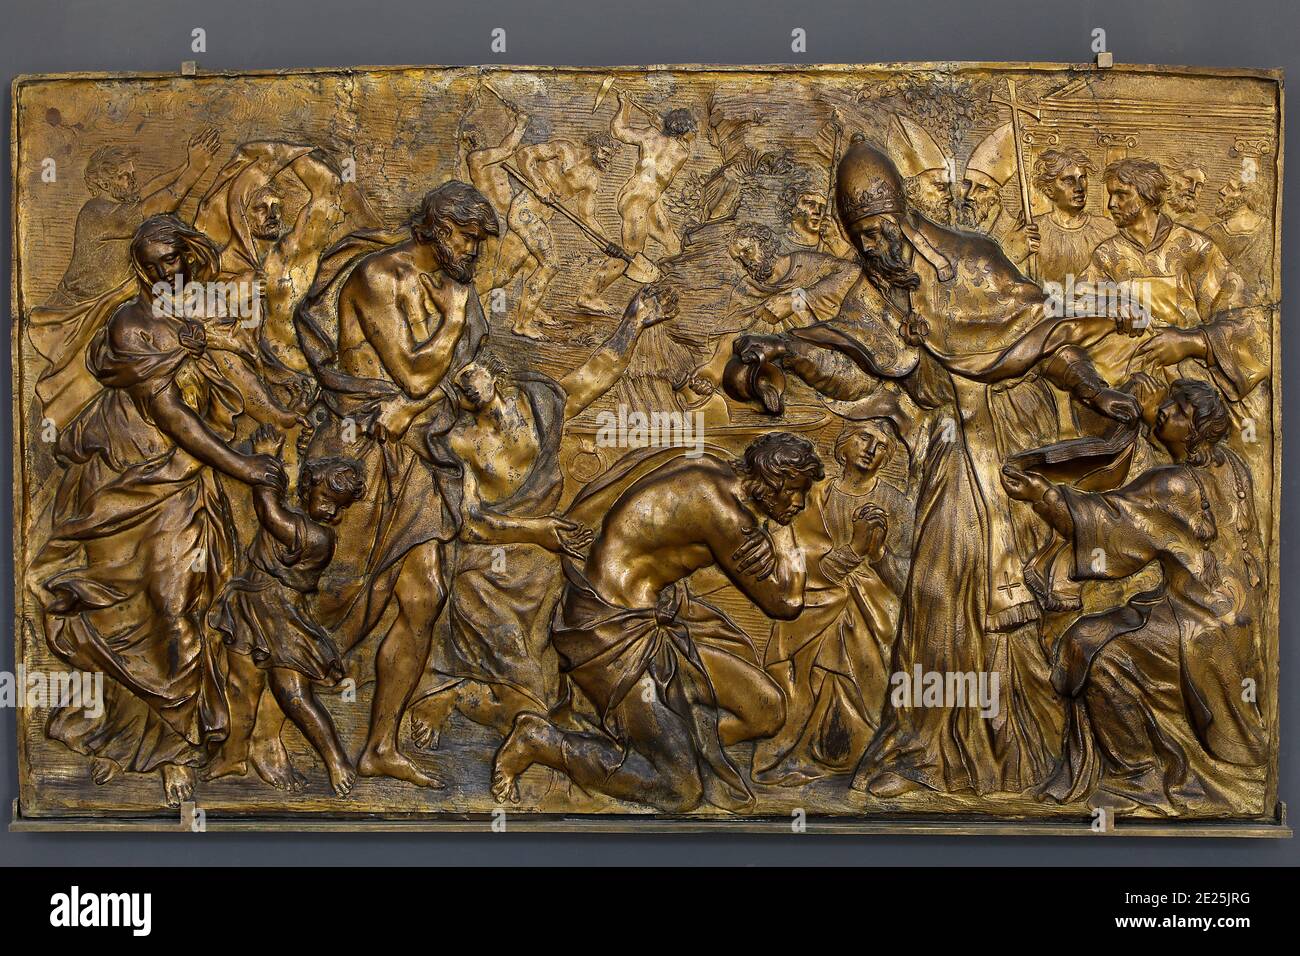 Louvre museum, Paris, France. Alessandro Algardi, Pope Liberius baptising the Neophytes, after 1648, gilded bronze Stock Photo